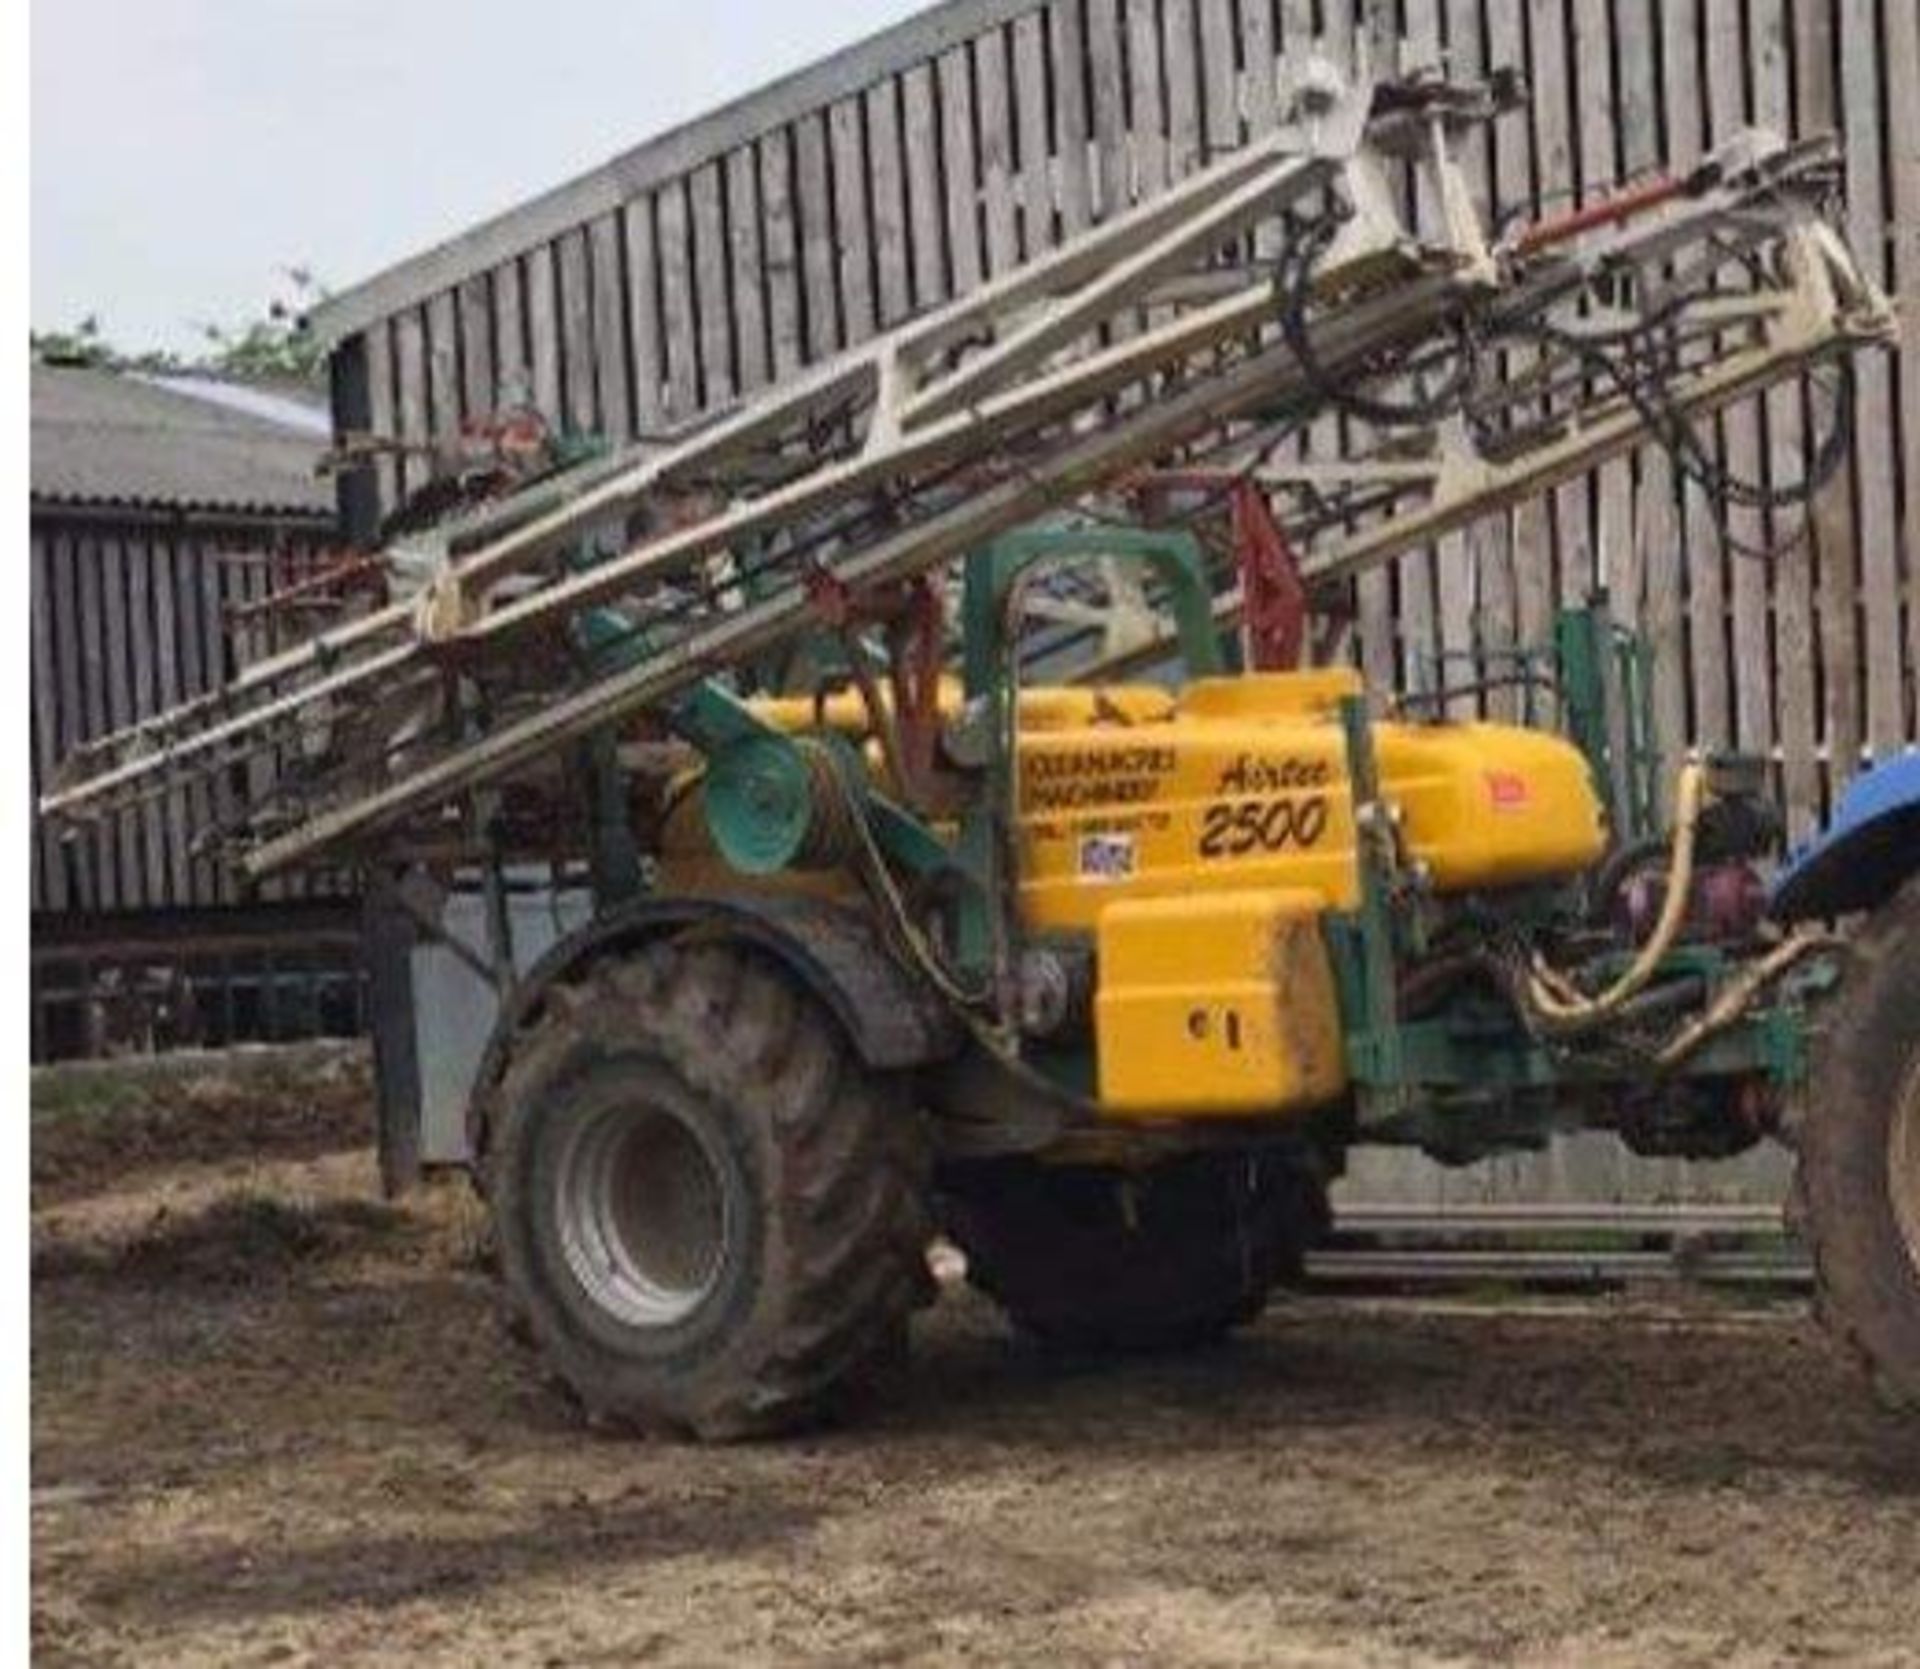 CLEANACRES 2500 L SPRAYER 12/24M AIRTEC ALLOY BOOMS APPROX YEAR 2006